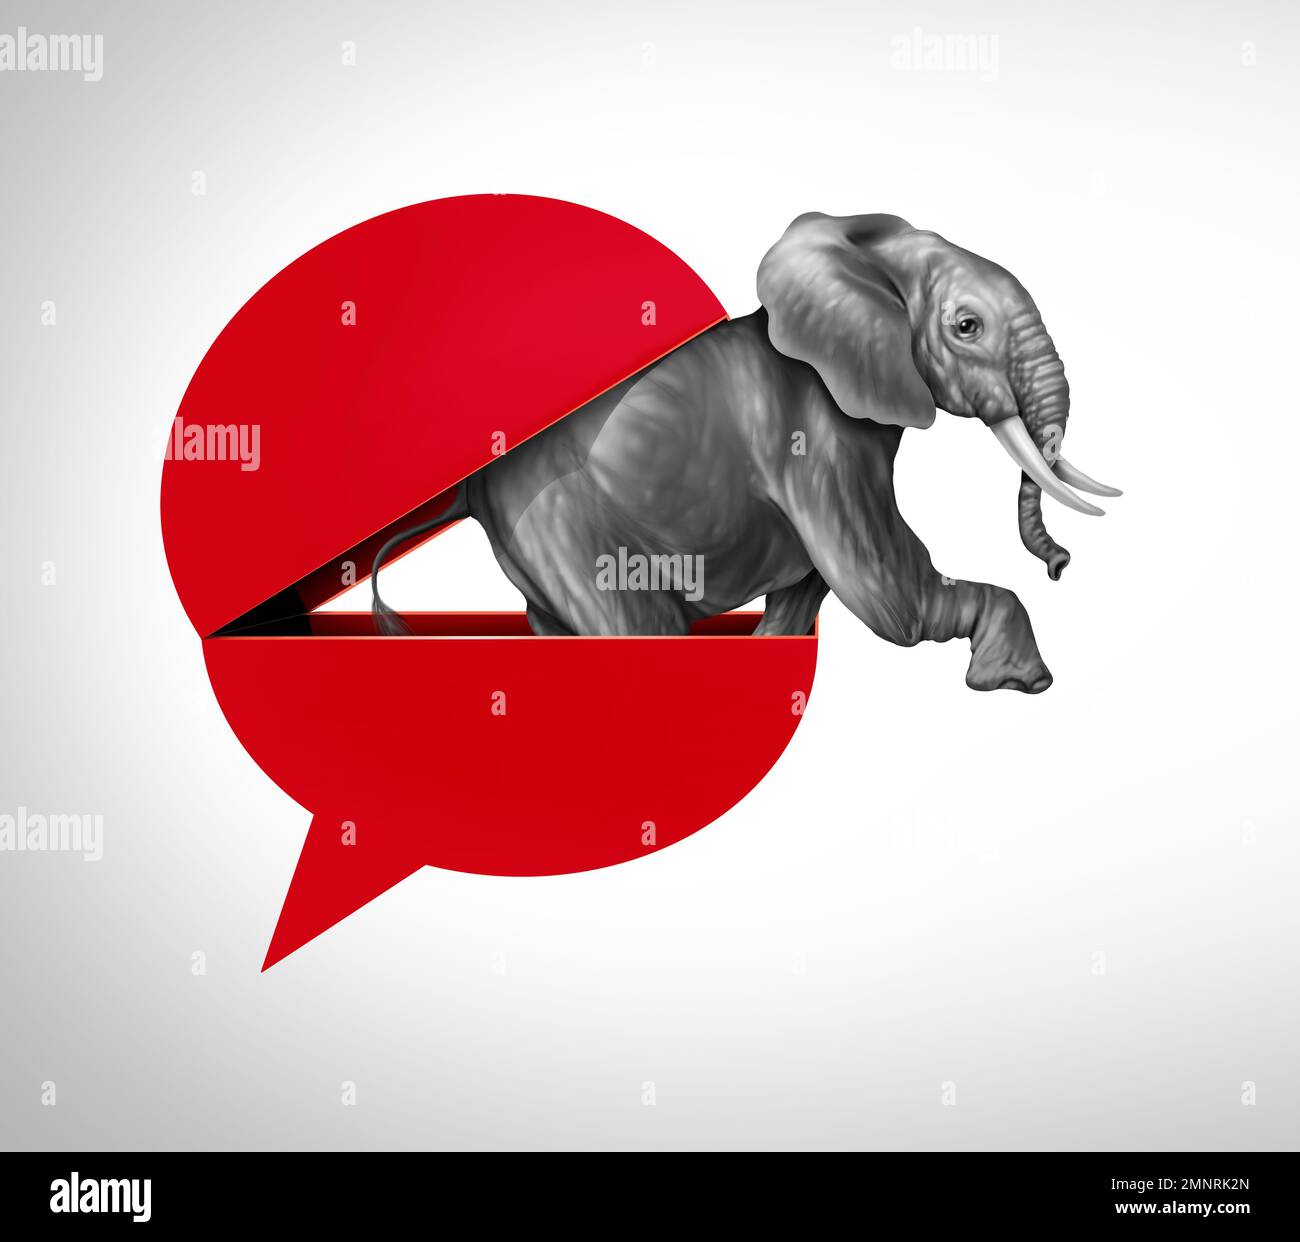 Right Wing Commentary and conservative talk symbol as an open red speech bubble with an elephant emerging out as a symbol of politics. Stock Photo